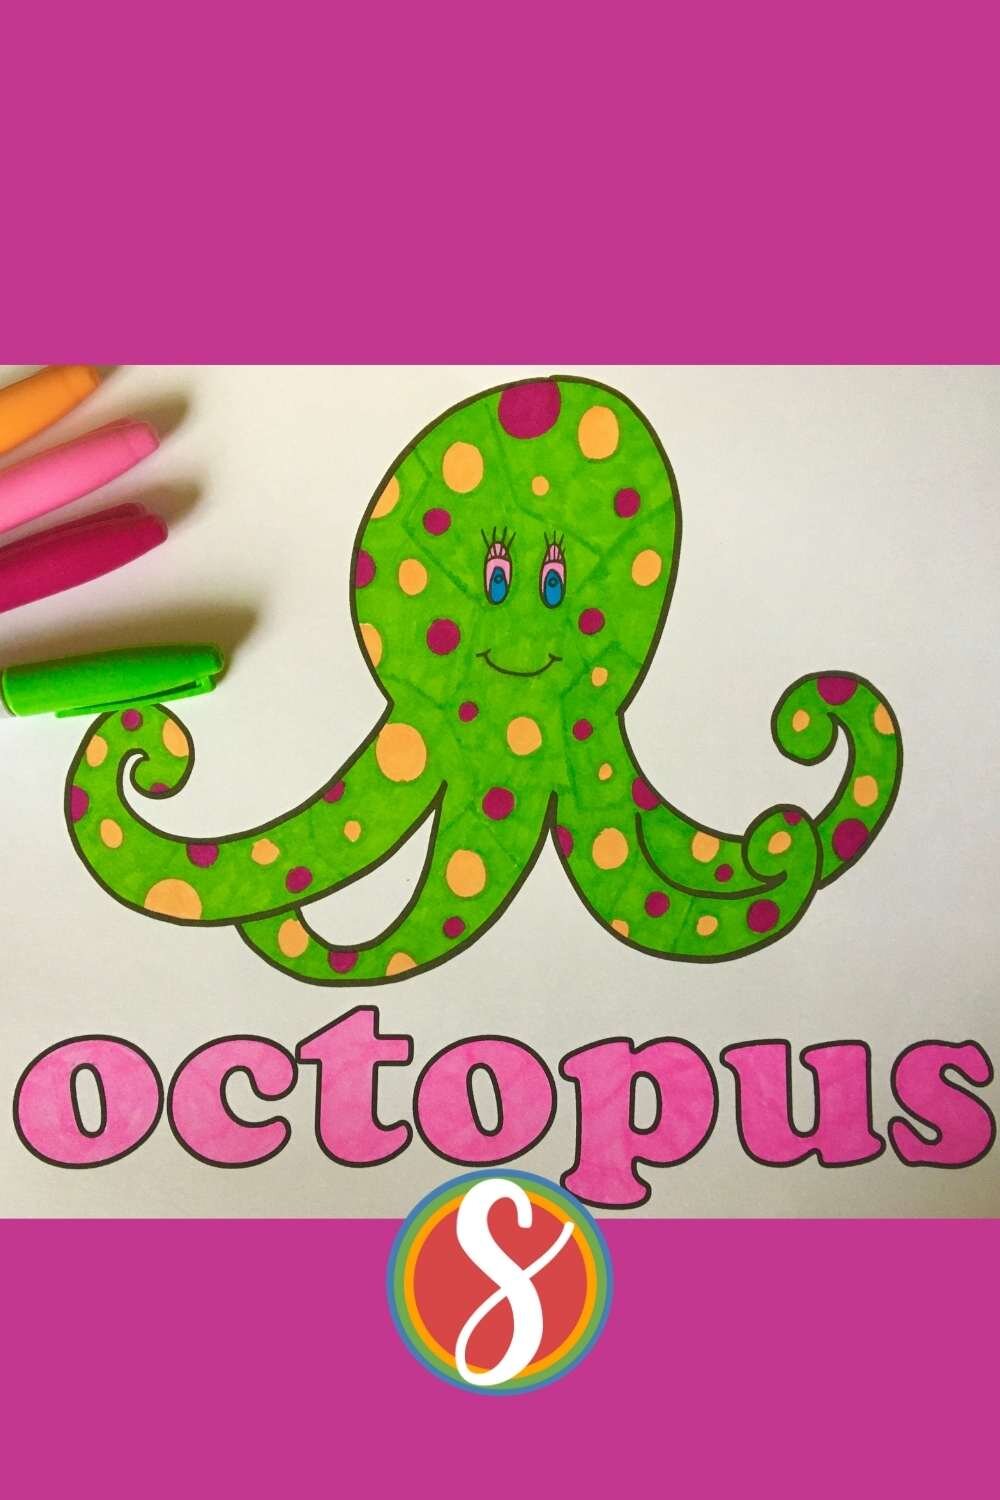 A colored octopus coloring page - a simple octopus drawing with spots inside, colored green with orange and magenta spots